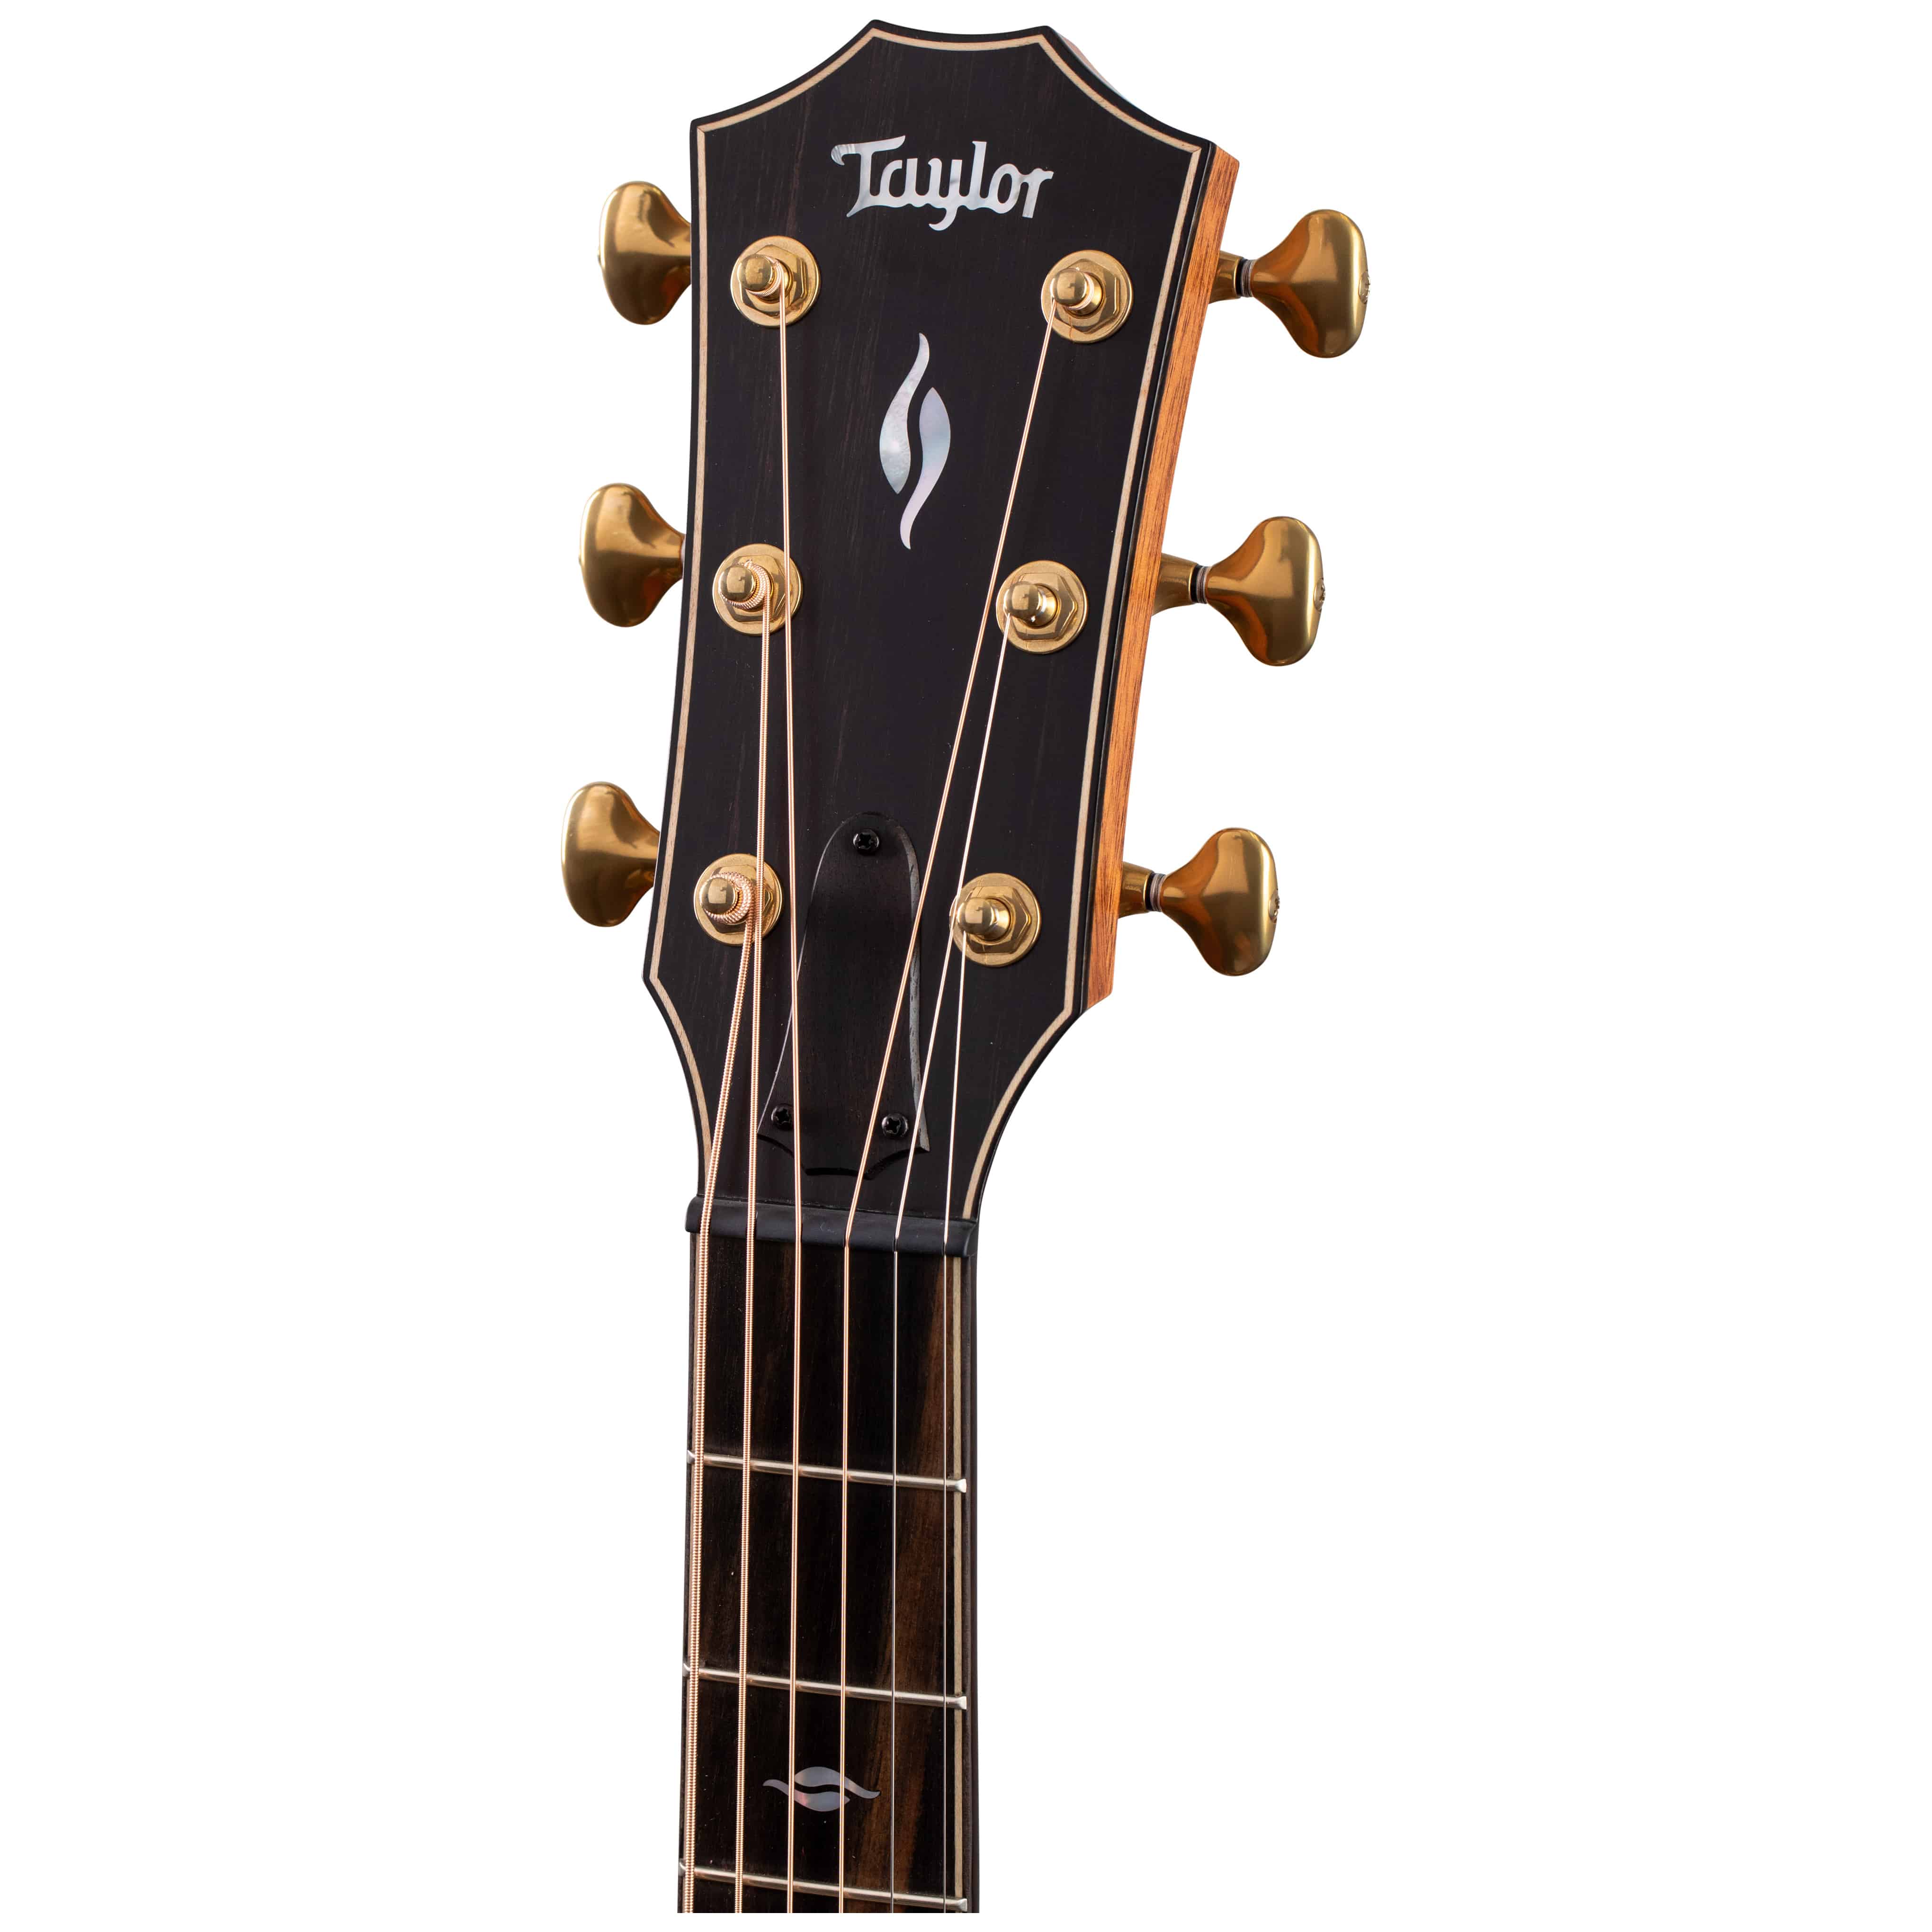 Taylor Builder’s Edition 816ce 5